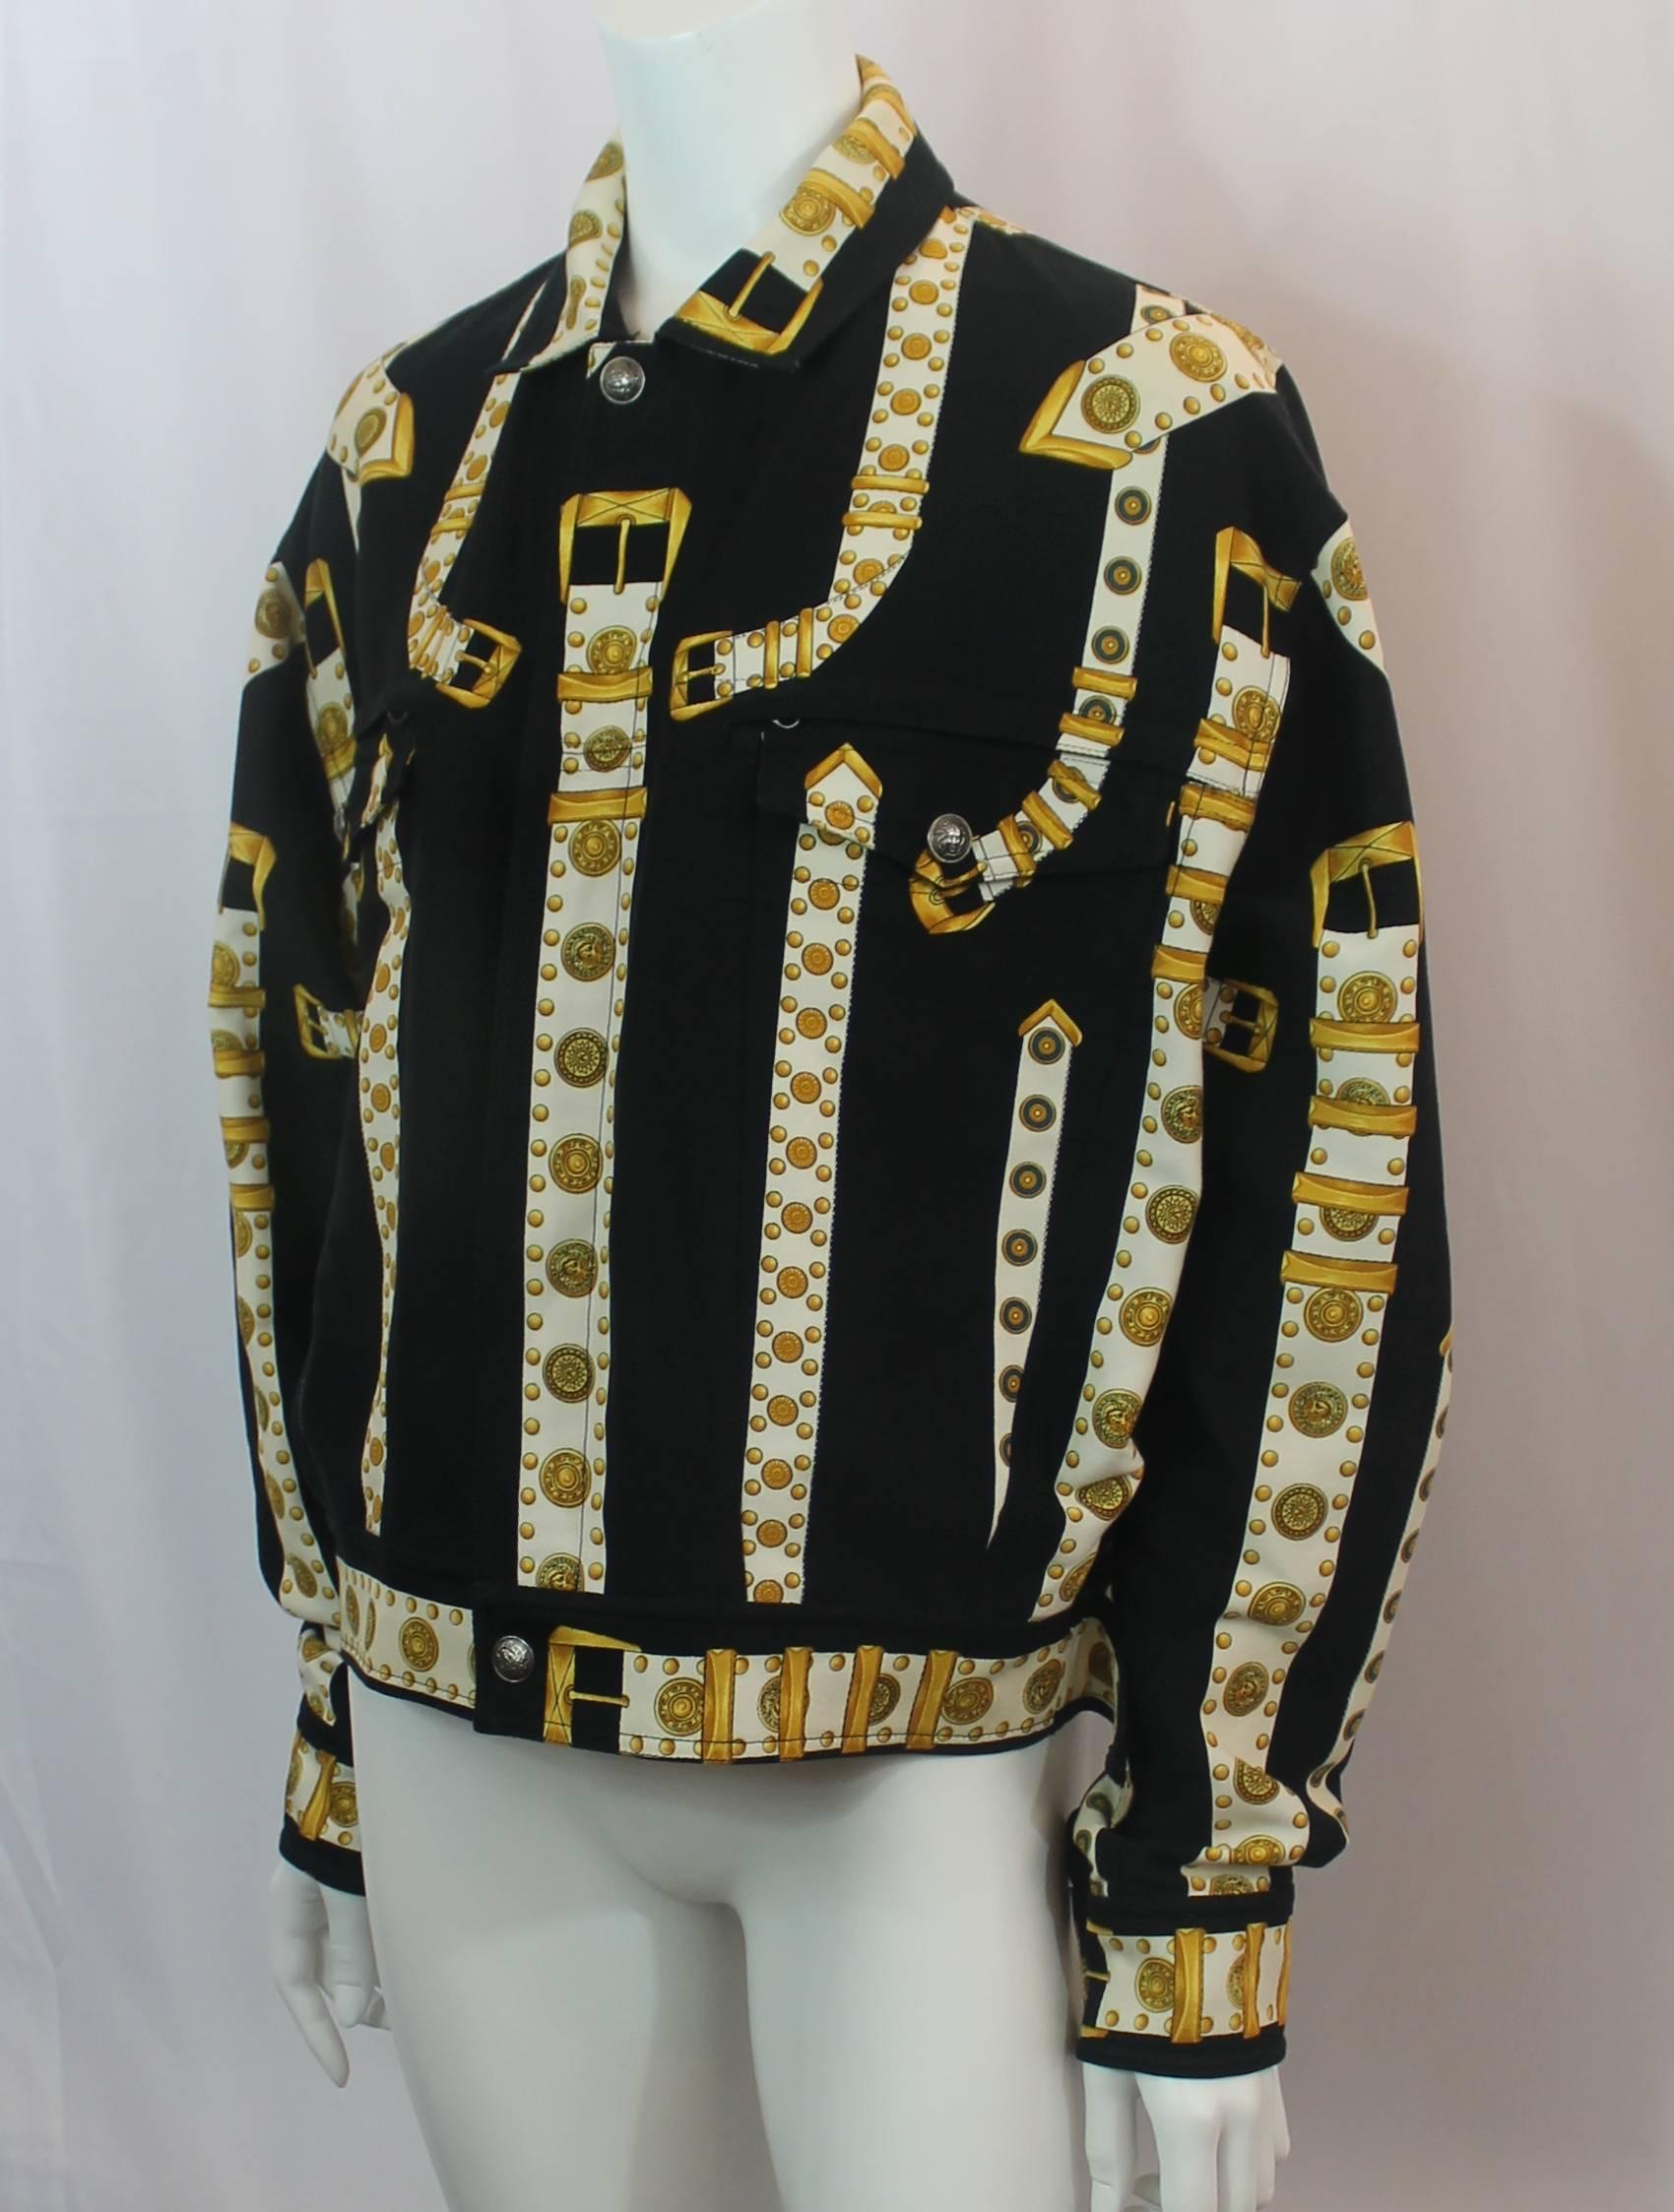 Versace Black, White & Gold Cotton Blend Studded Belt Print Jacket - 48. This 2000's jacket is in excellent condition with light wear consistent with age. The jacket has a jean material with a print that has black in the background and white